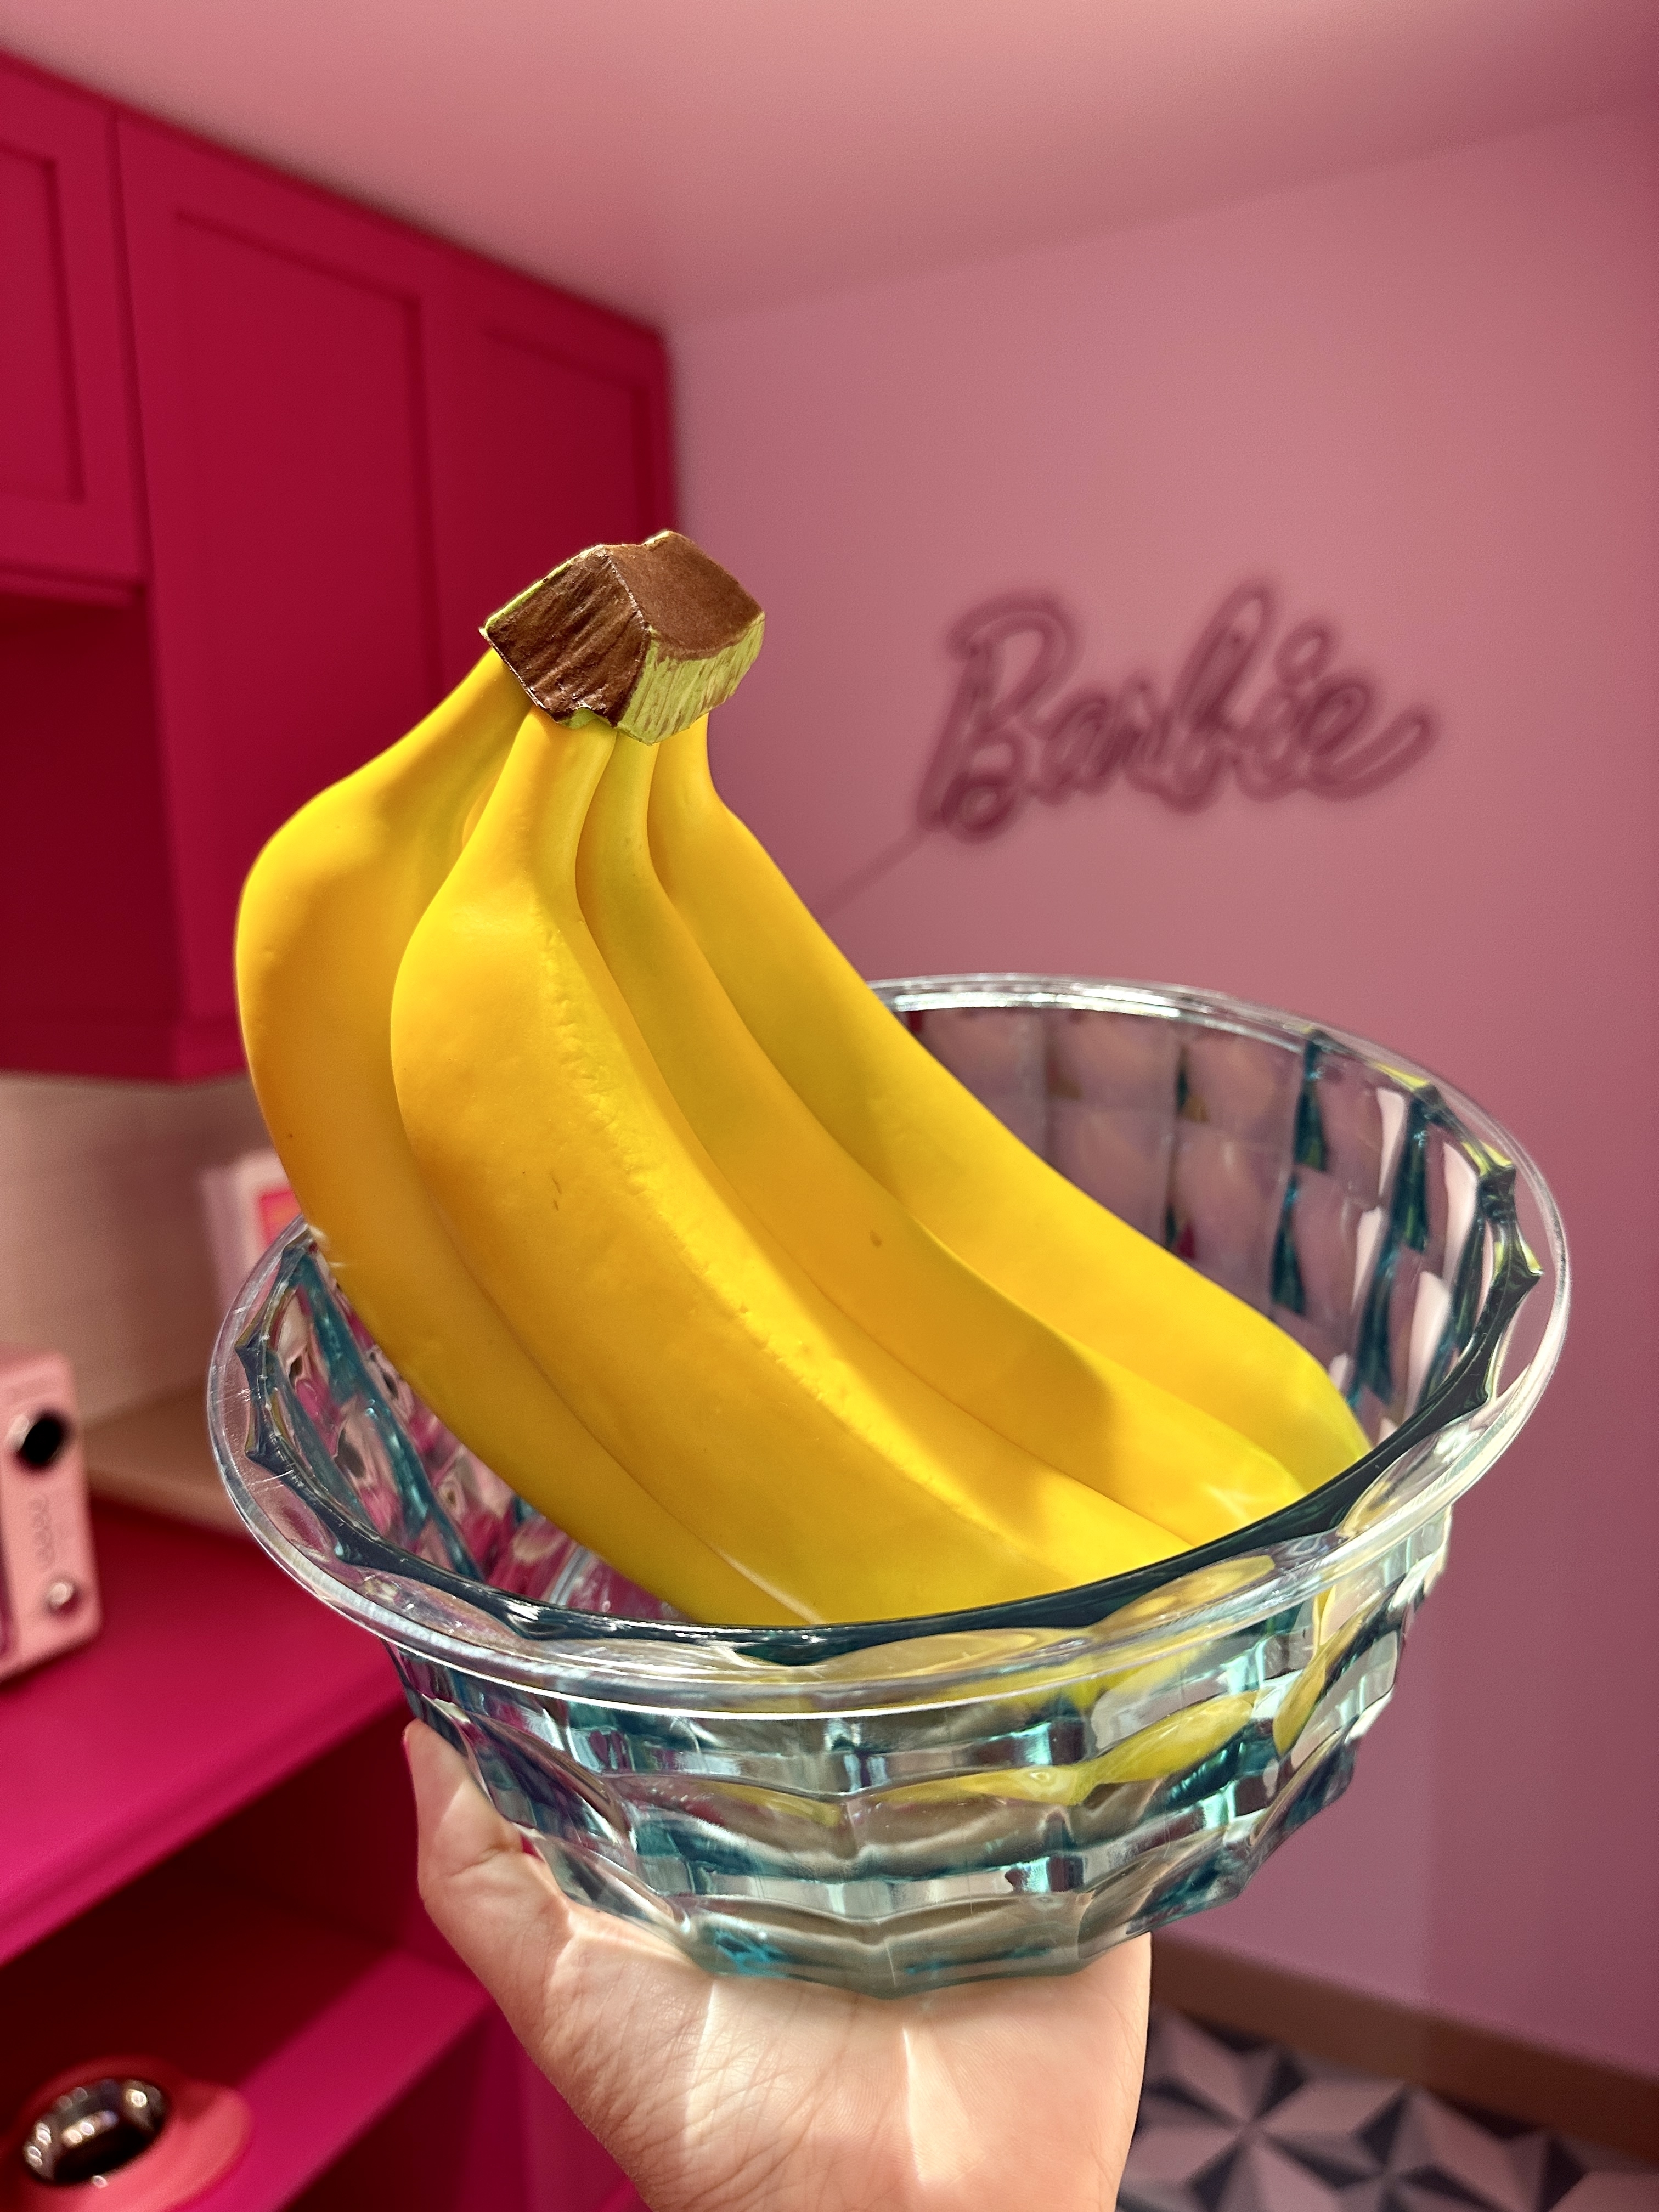 Banana props in a glass bowl